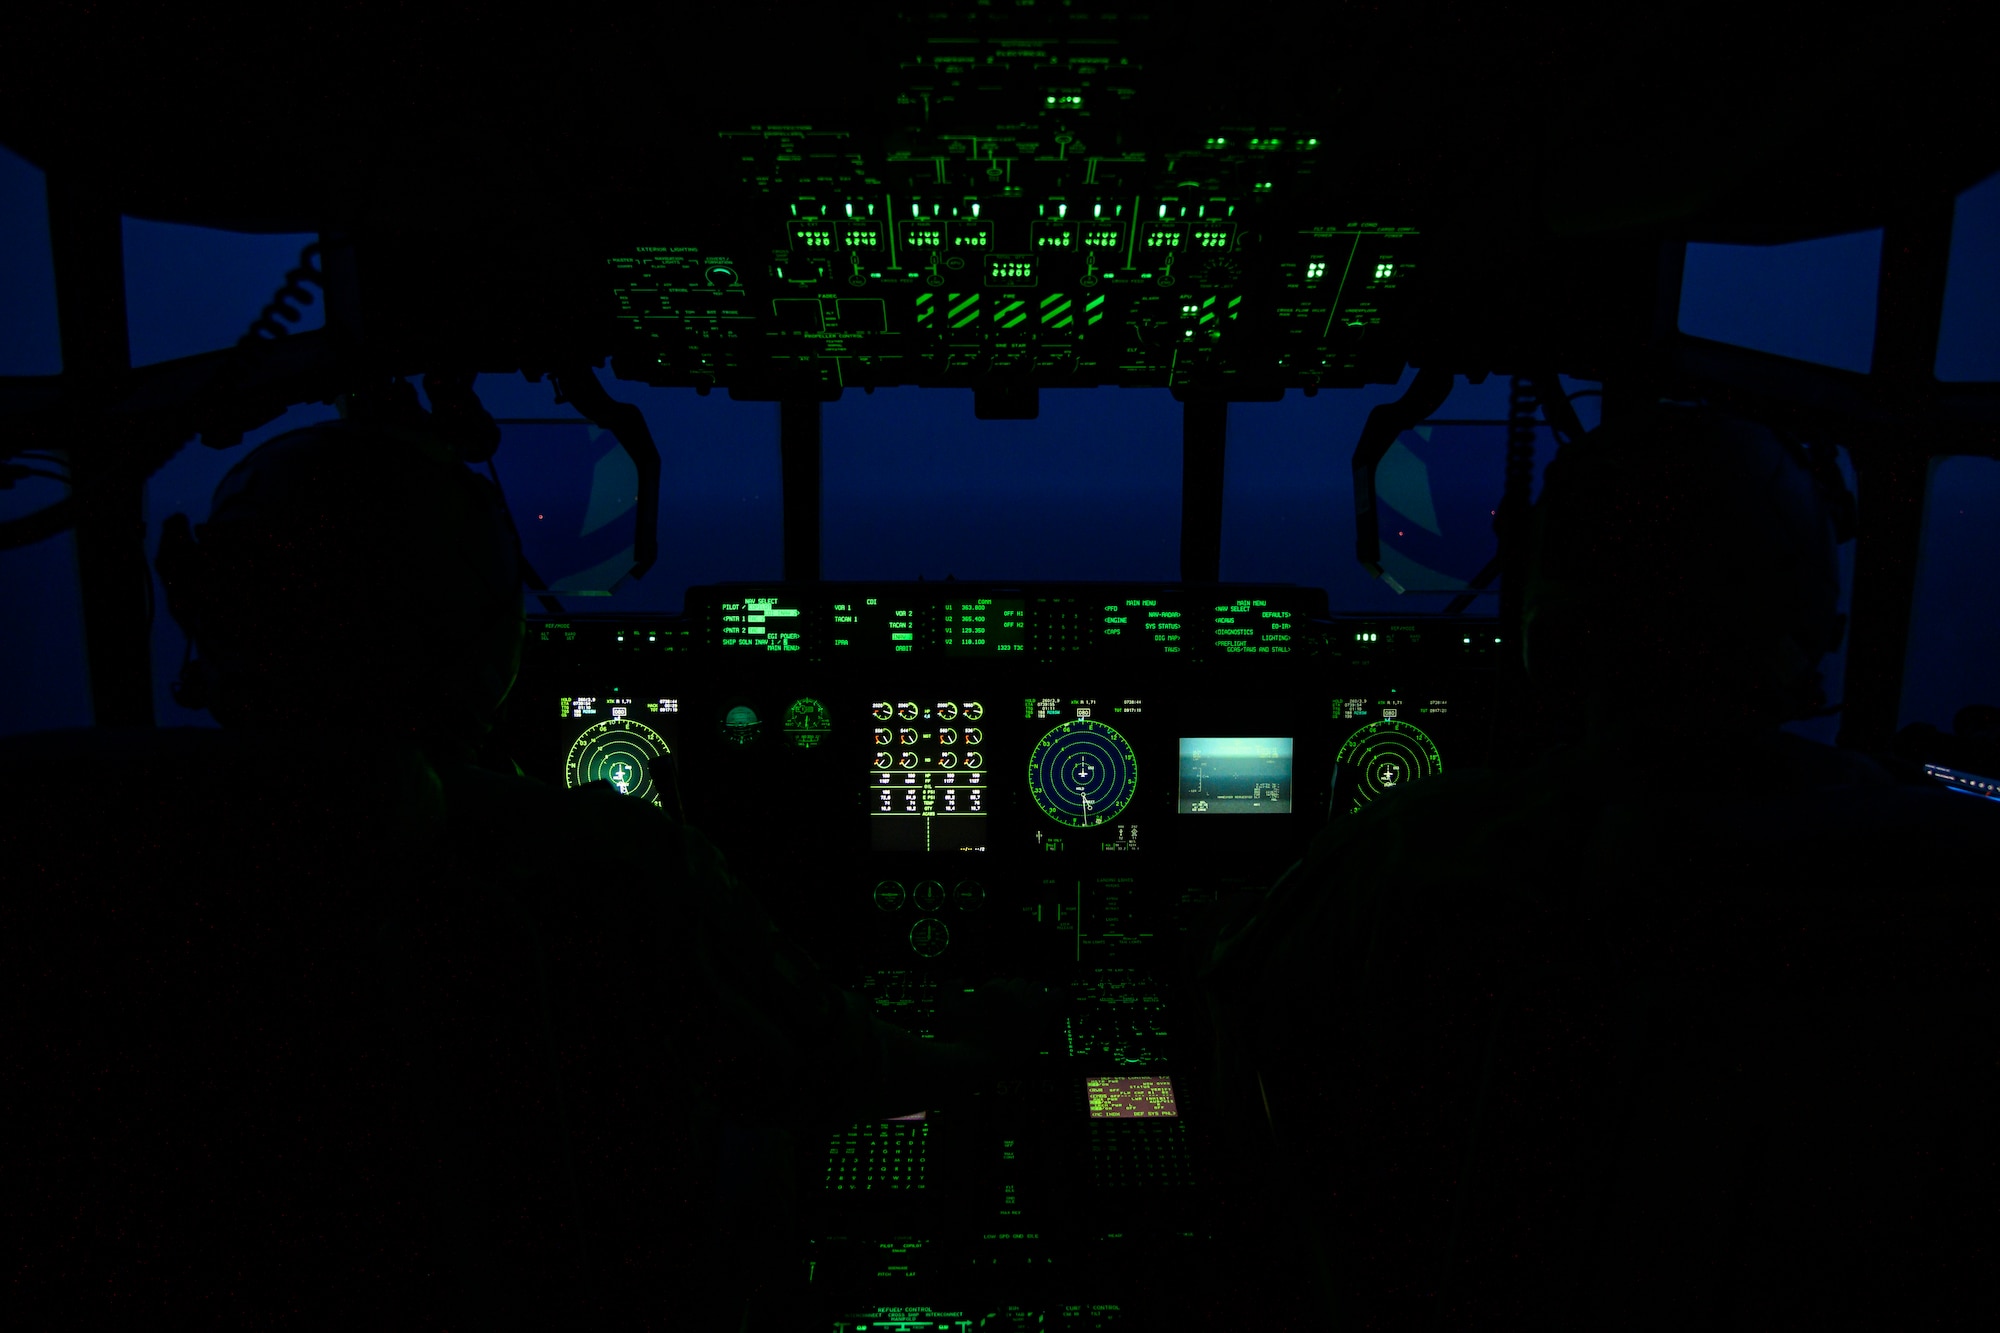 Pilots assigned to the 1st Special Operations Squadron fly above the Northern coast of Japan, Nov. 18, 2020. To sustain readiness in adverse conditions, FARP training can take place anytime, day or night. When a fighter squadron has FARP support, choices are tremendously increased. (U.S. Air Force photo by Airman 1st Class China M. Shock)